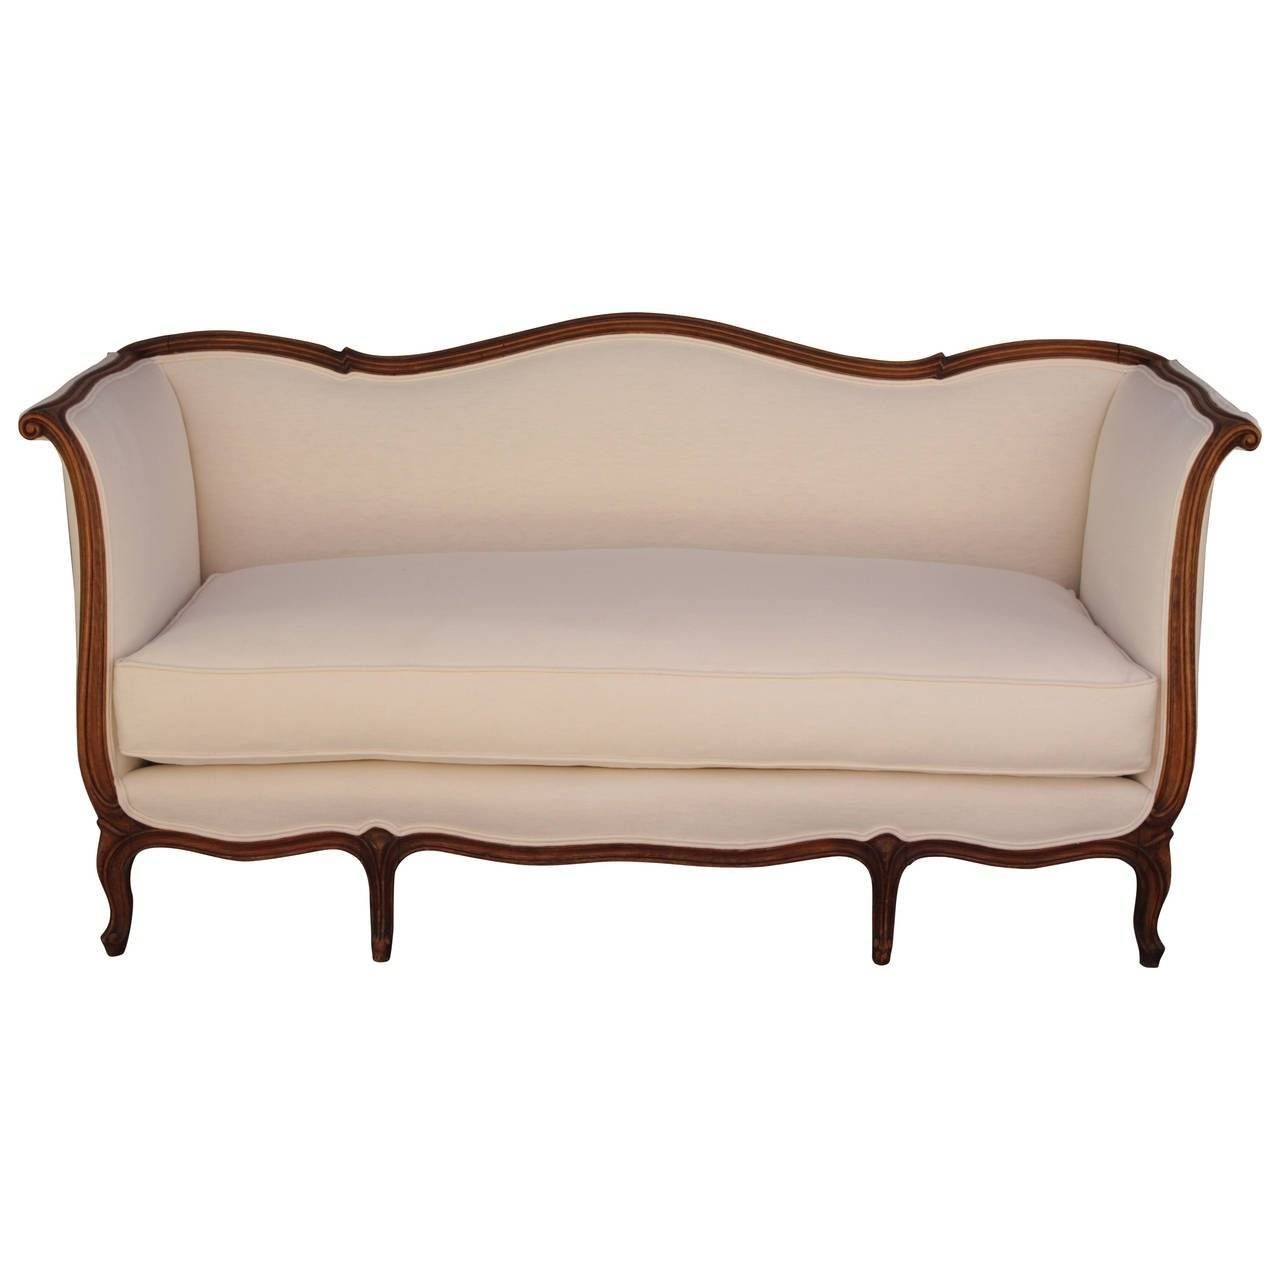 French Louis Xv Style Sofa With Linen Upholstery At 1stdibs Within French Style Sofas (Photo 3 of 25)